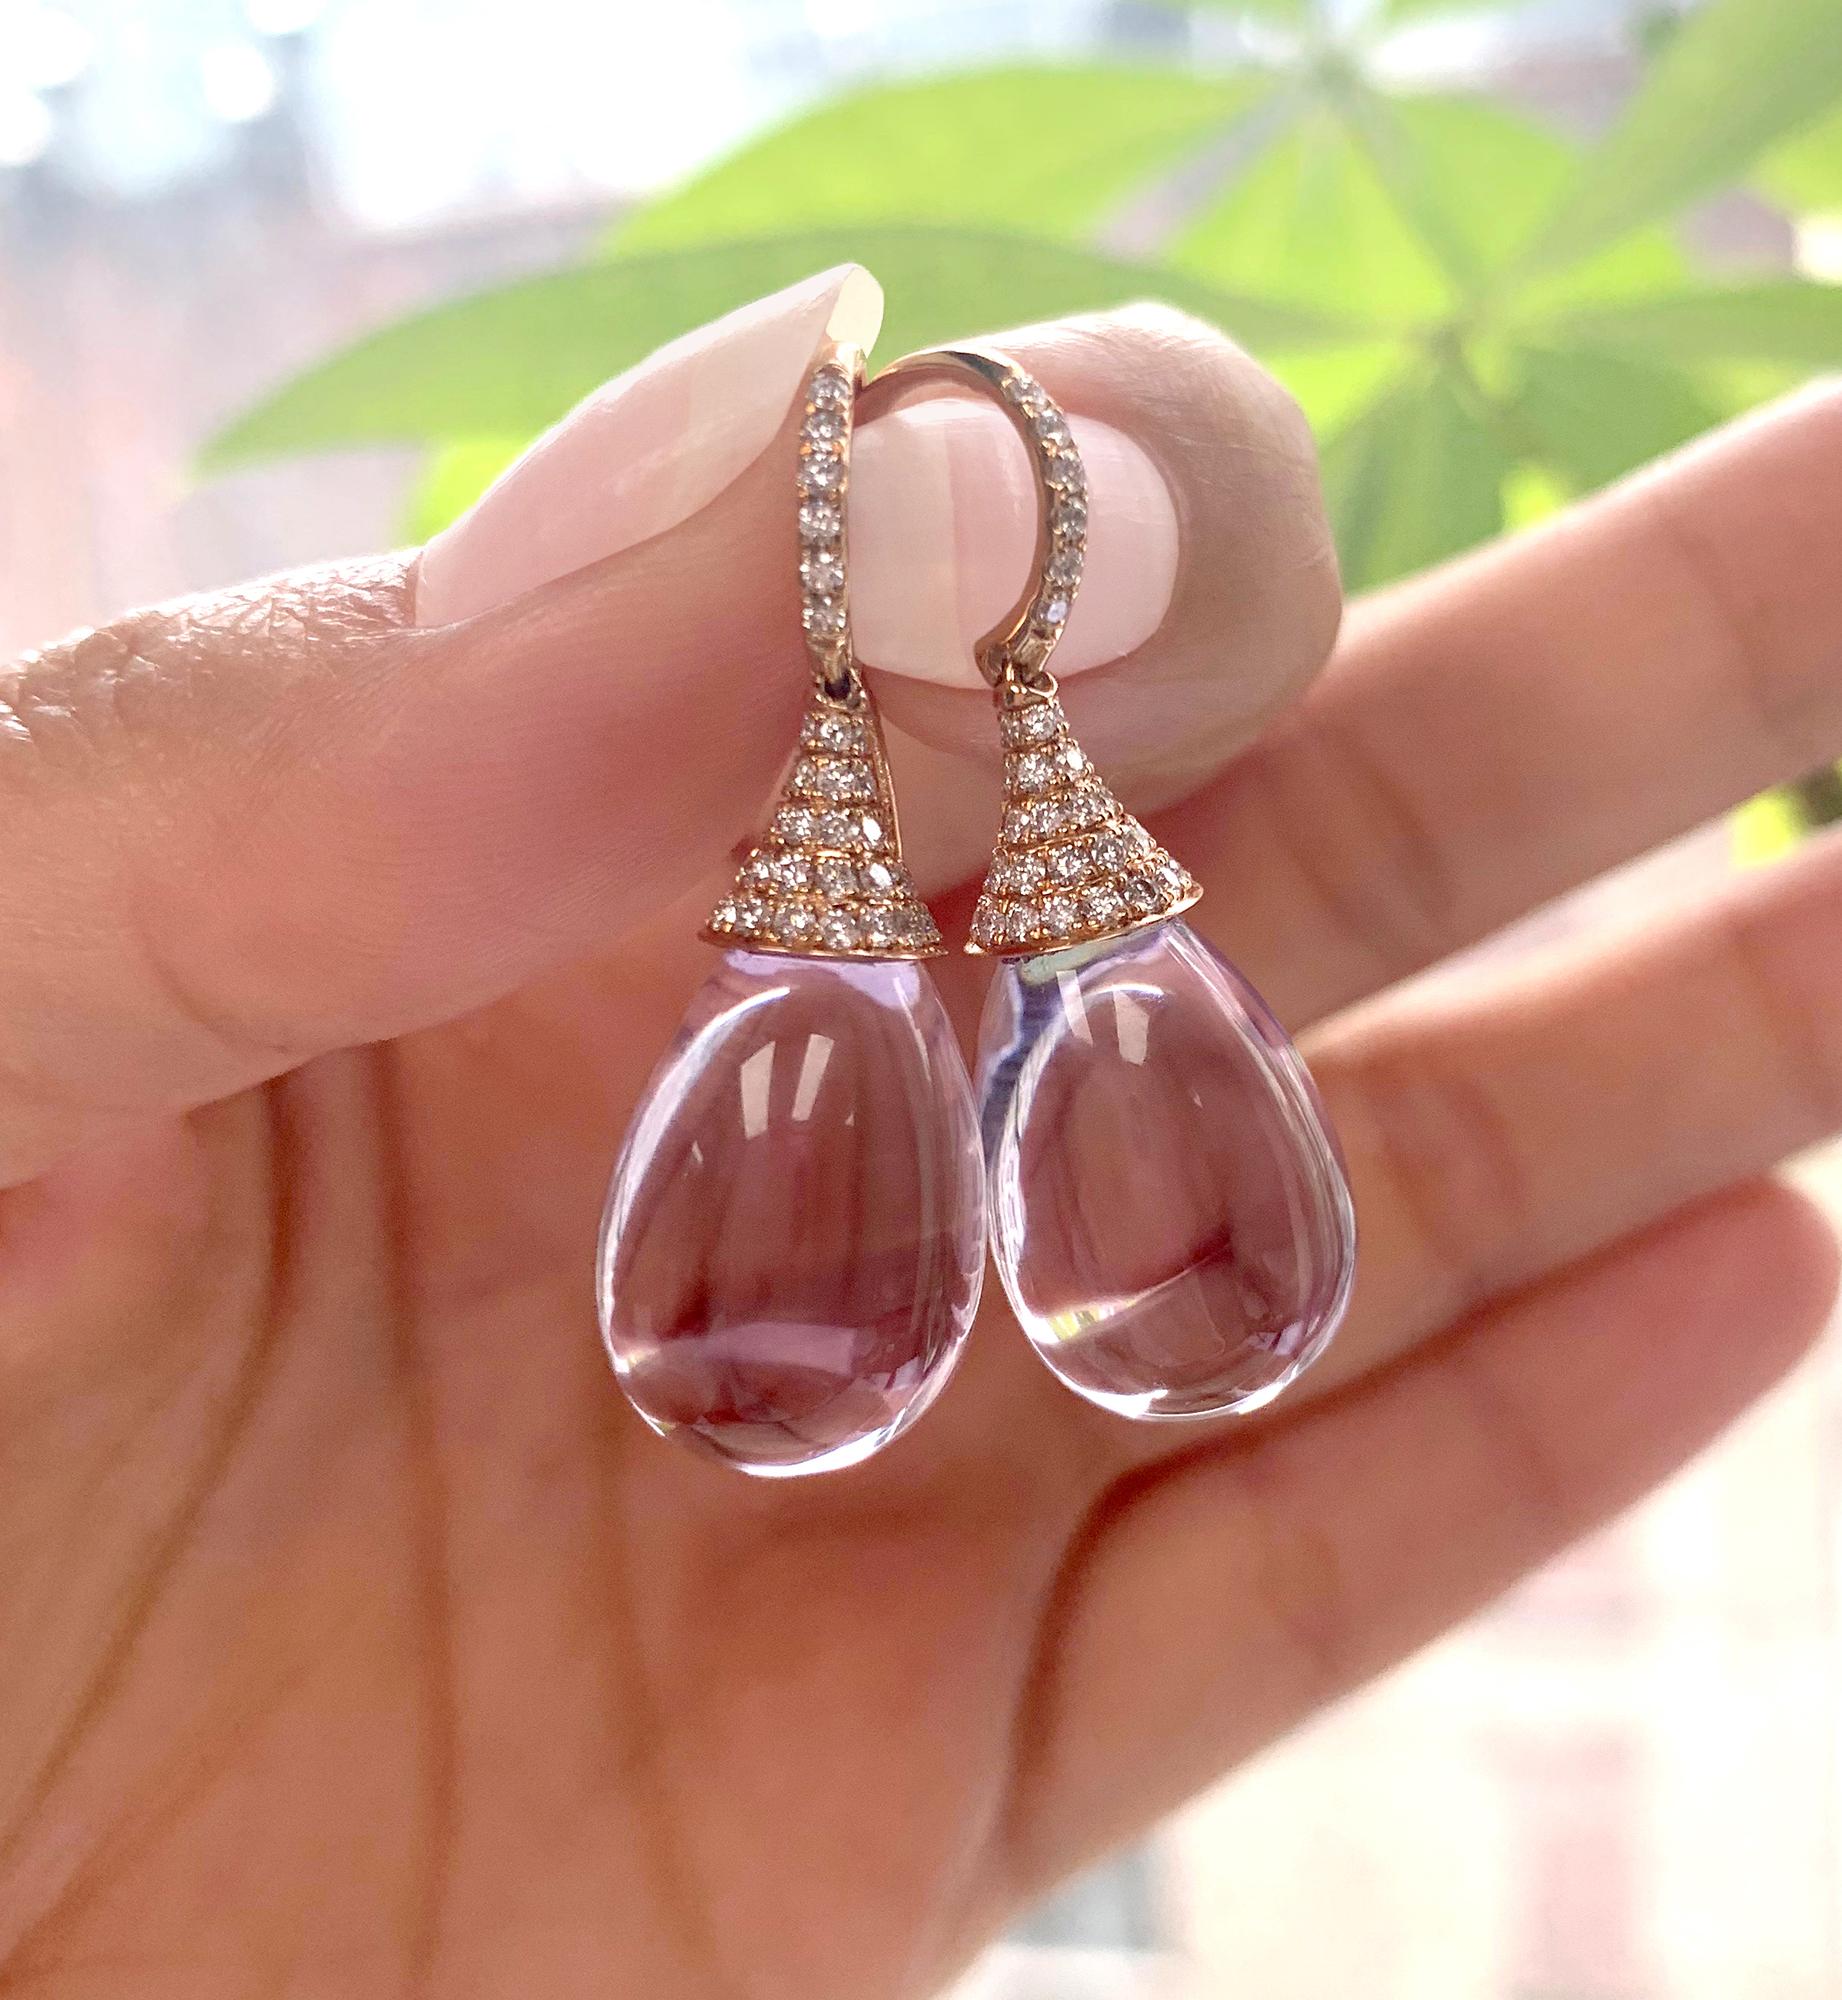 Lavender Amethyst Drops Earrings with Diamonds in 18K Rose Gold, form 'Naughty' Collection 

Stone Size: 19 x 12 mm

Gemstone Approx Wt: Lavender Amethyst- 35.11 Carats

Diamonds: G-H / VS, Approx. Wt: 0.78 Carats